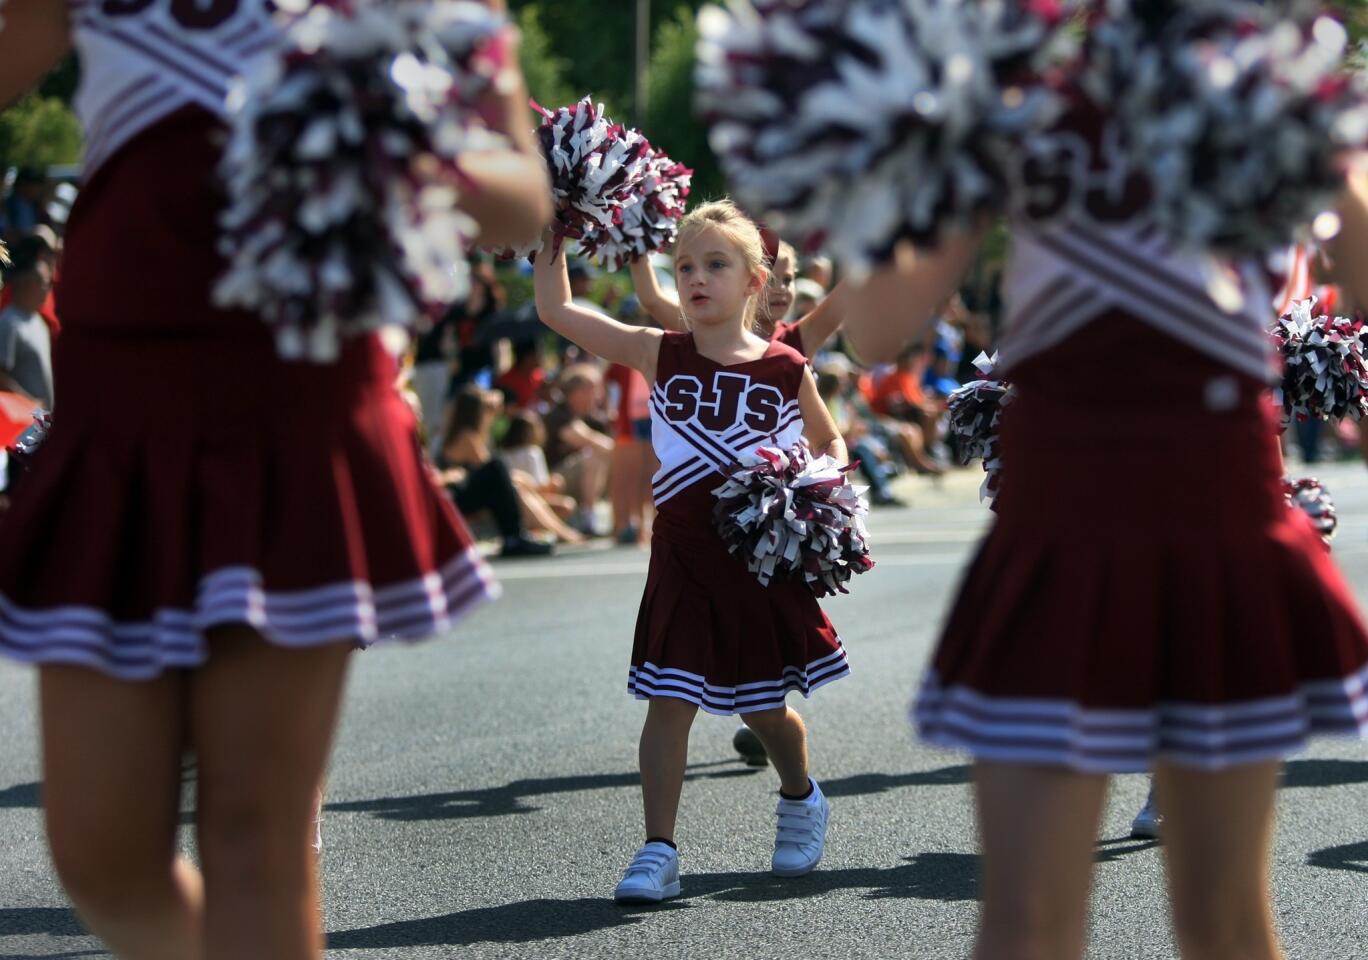 Cheerleaders from St. Jude School walk and cheer along Thousand Oaks Boulevard during the city's 50th anniversary parade on Saturday.